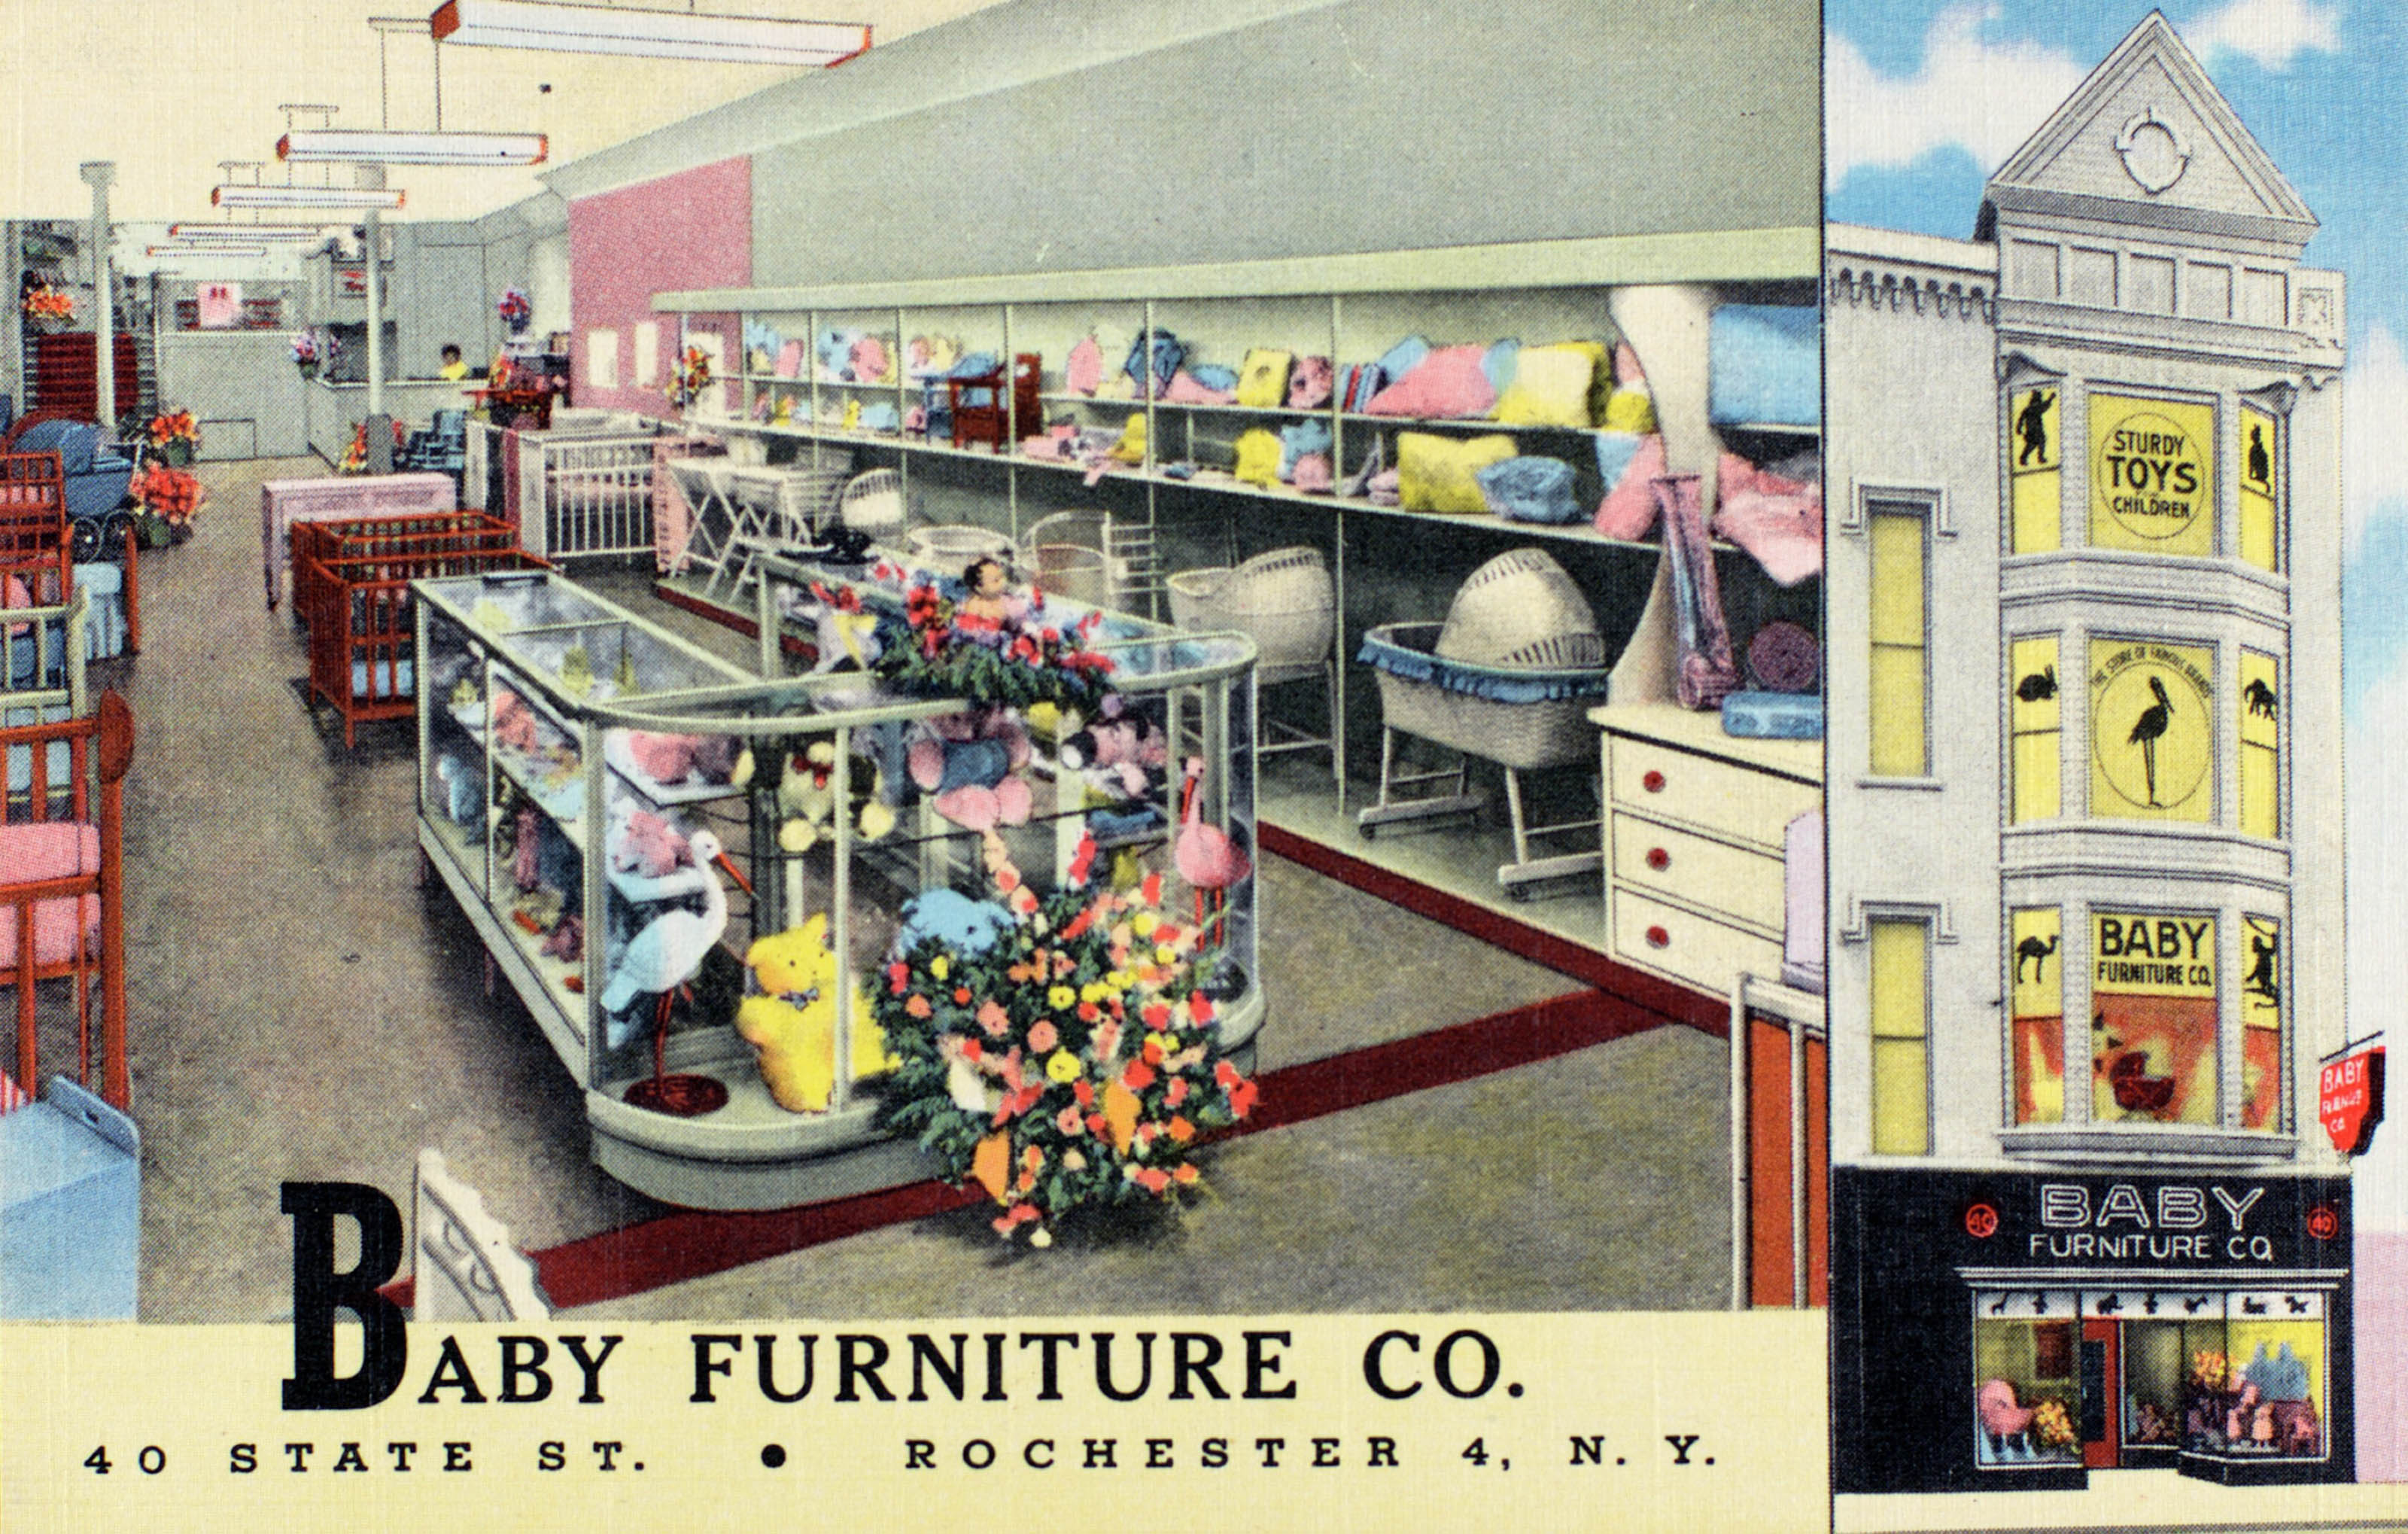 Baby Furniture Co.